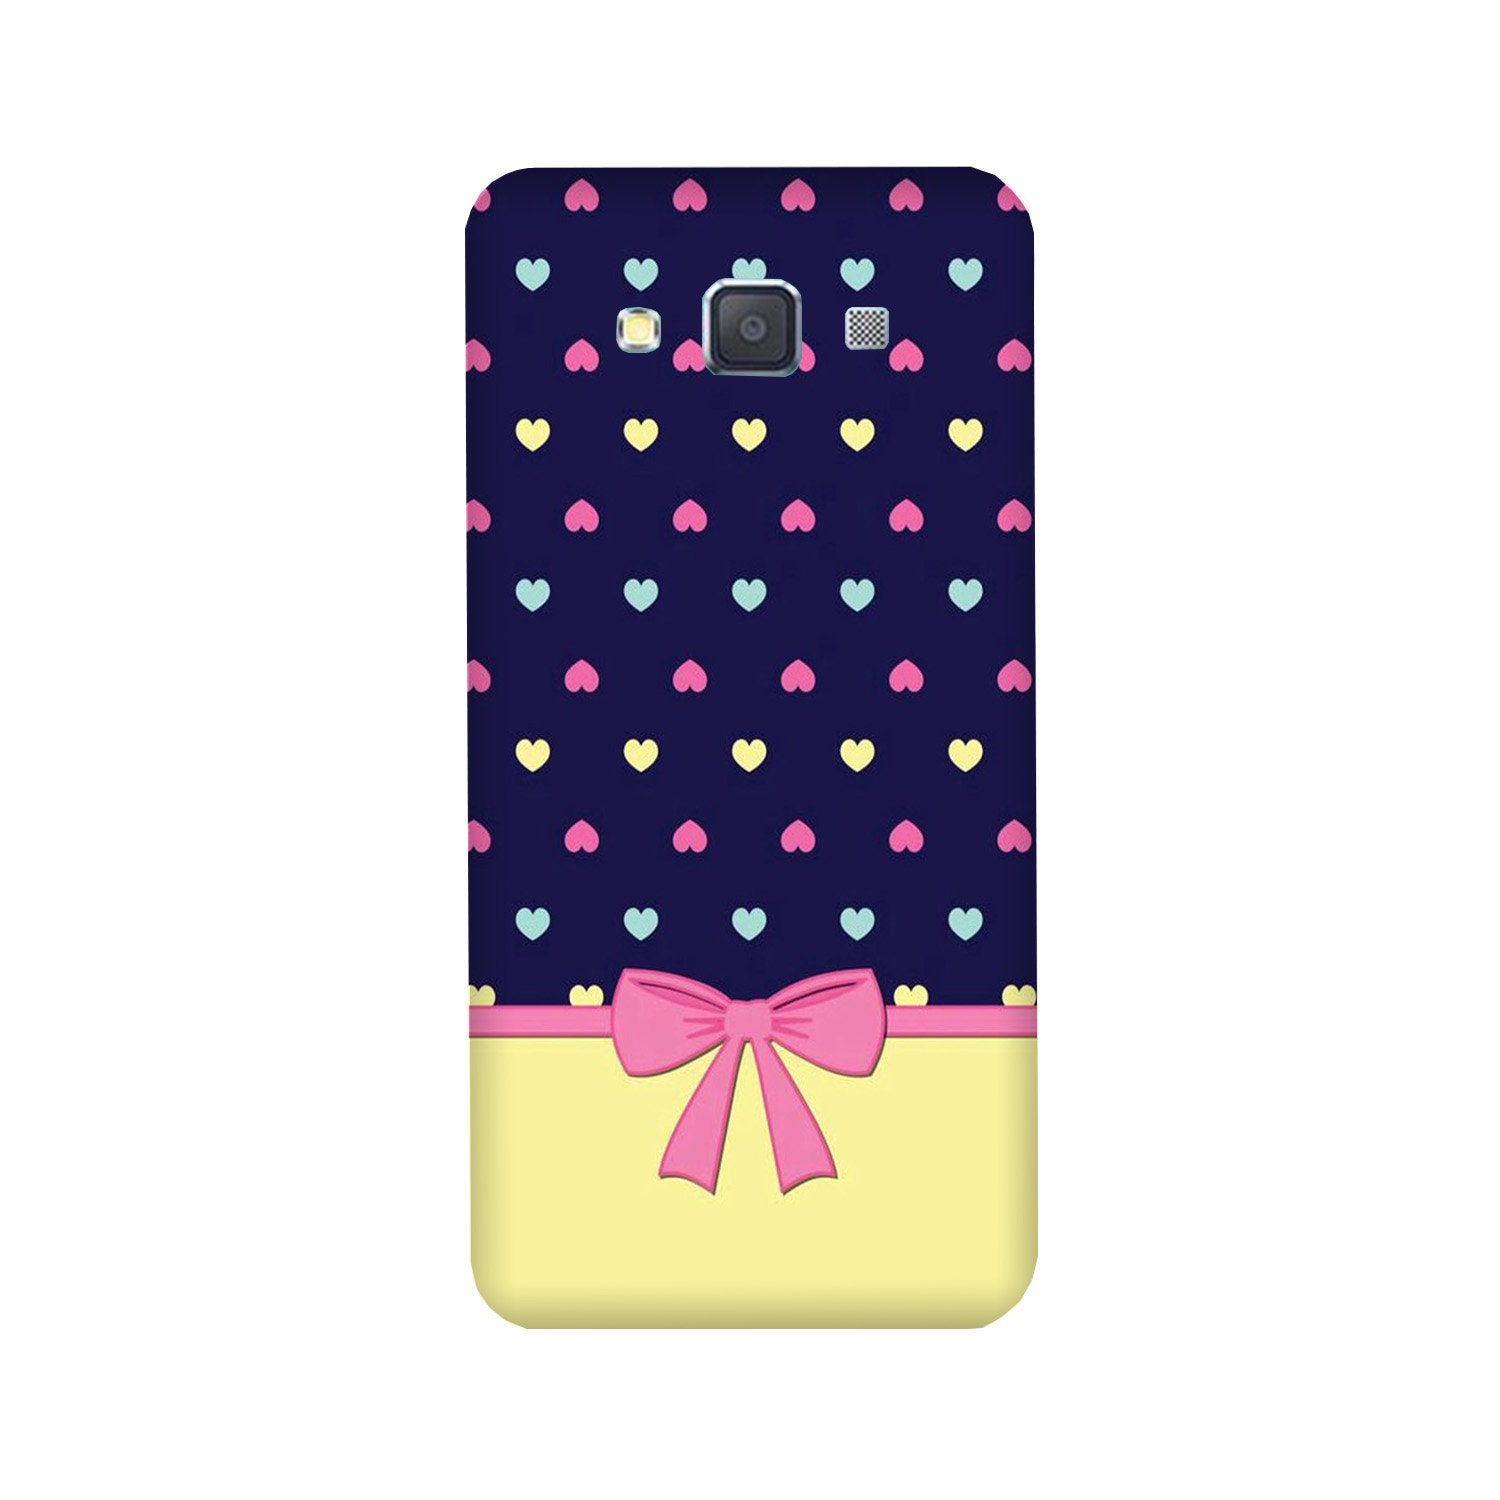 Gift Wrap5 Case for Galaxy ON5/ON5 Pro